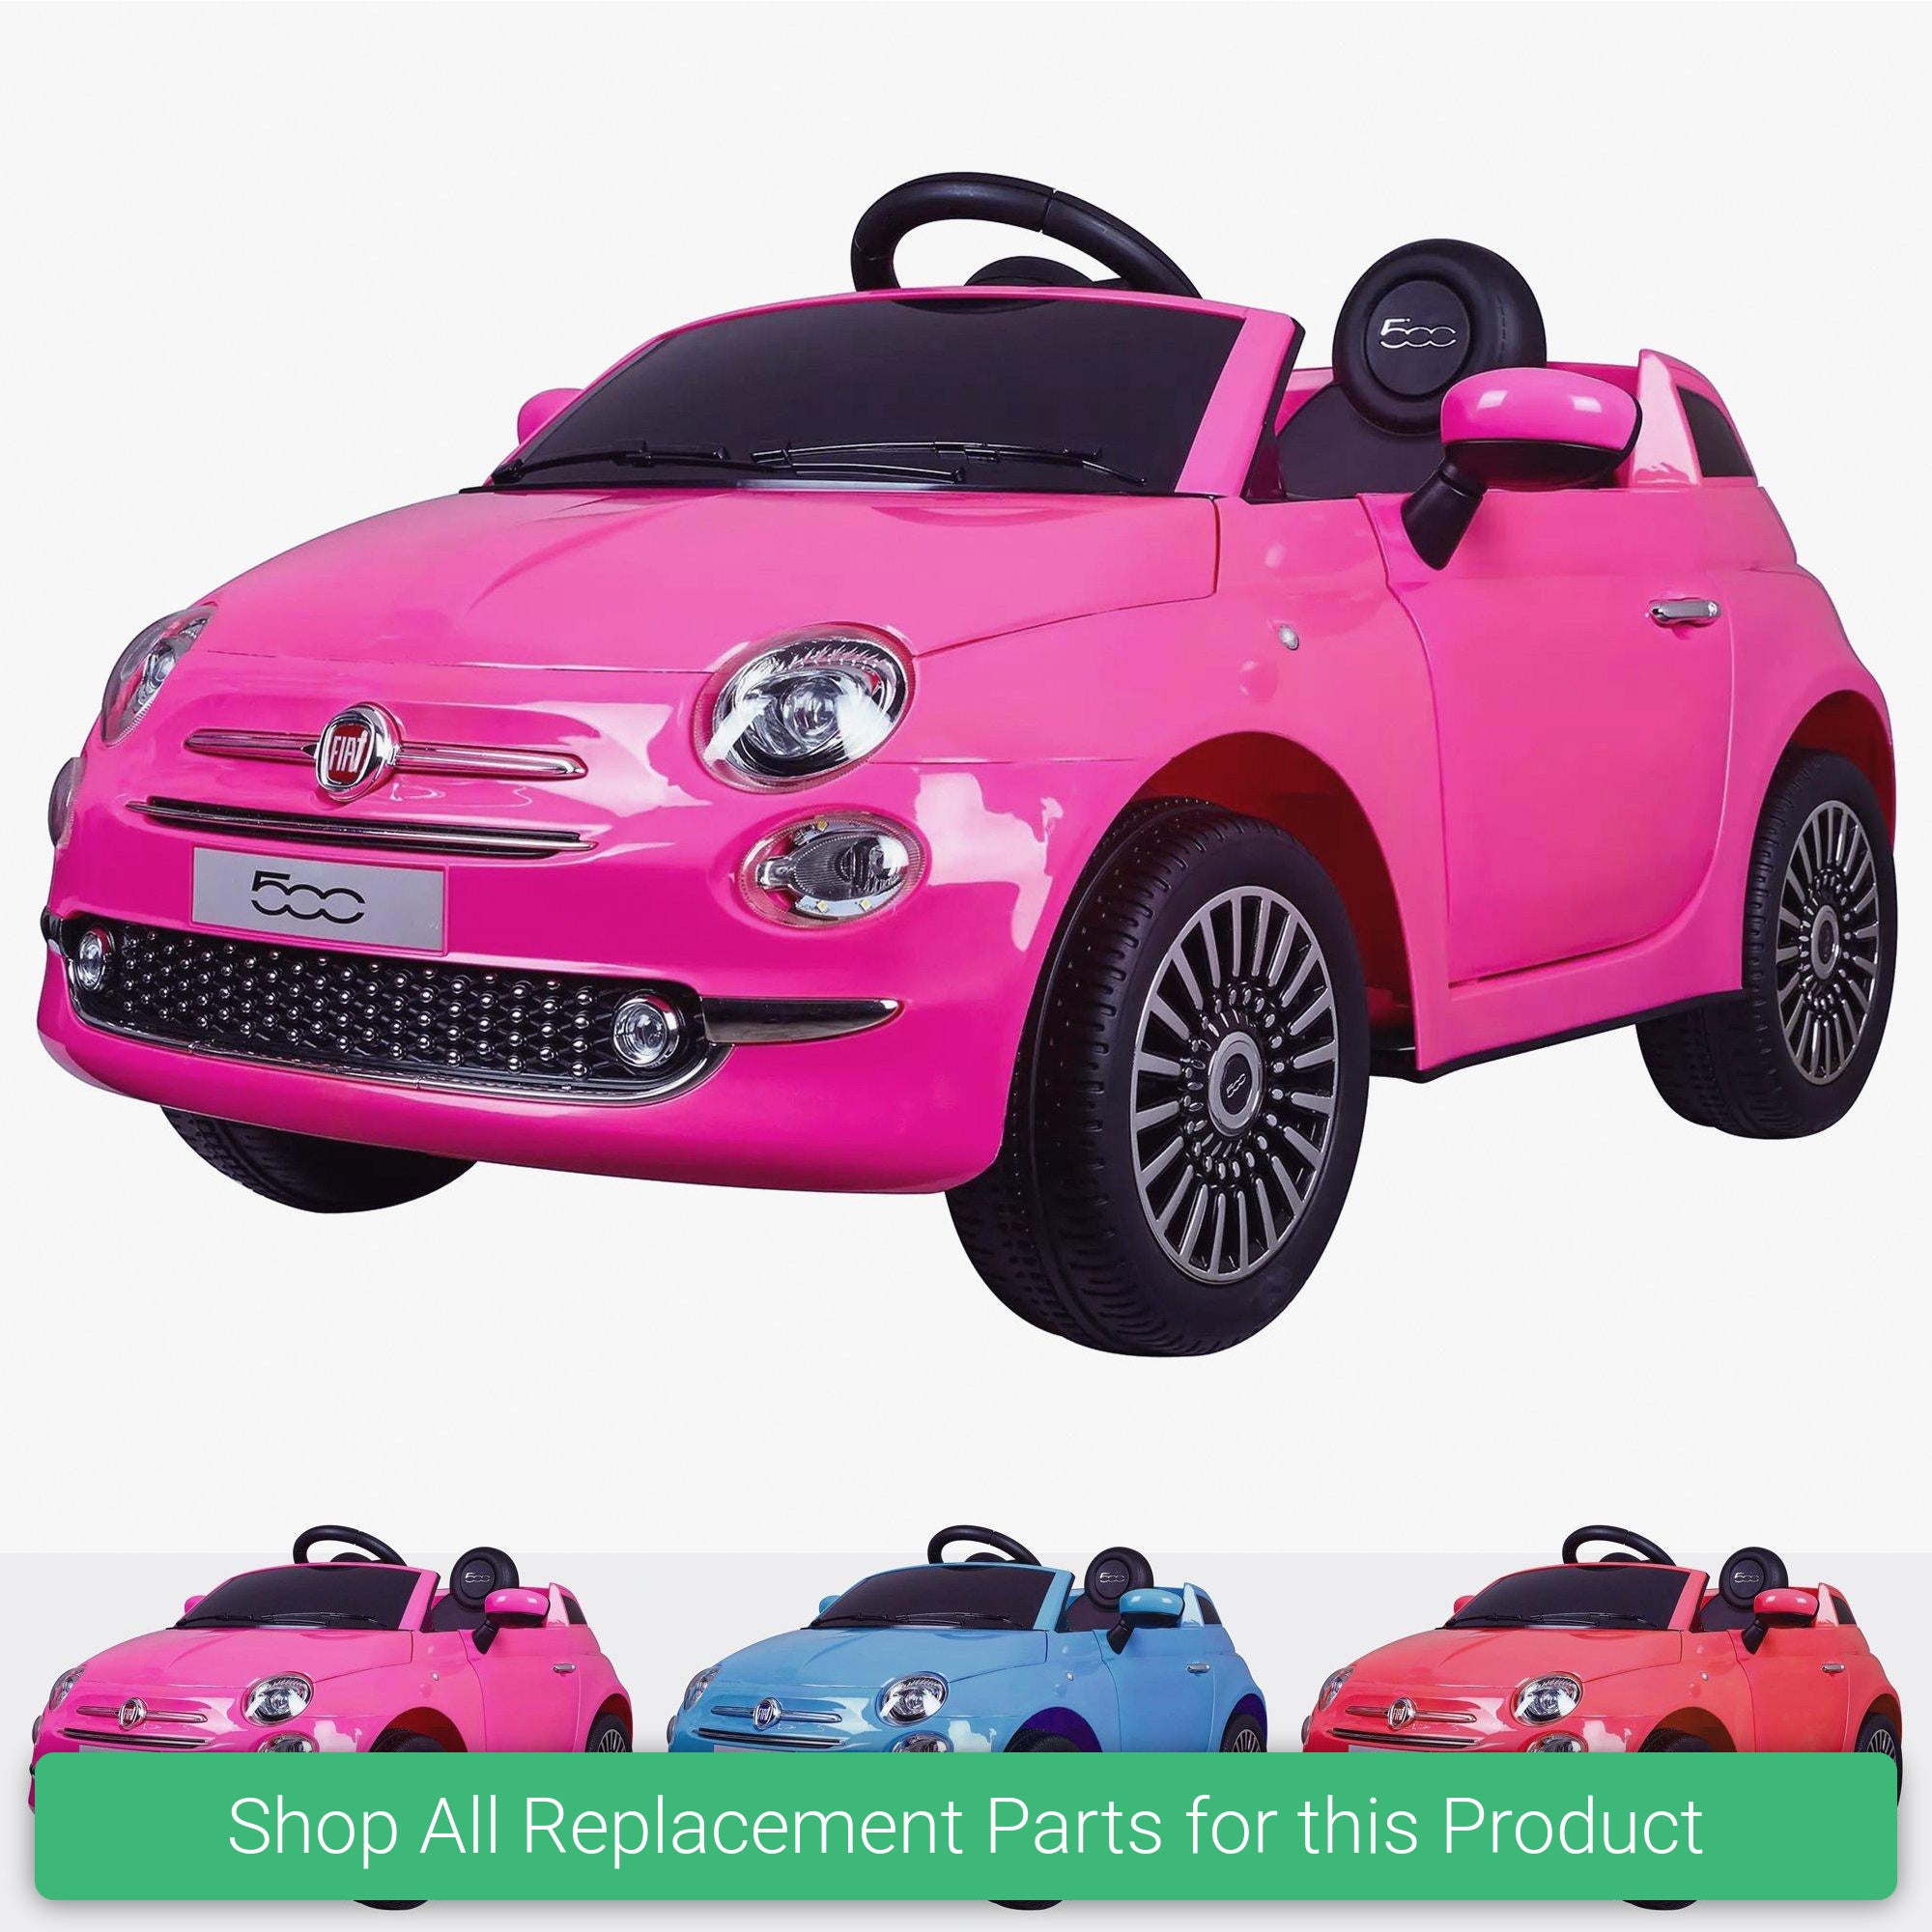 Replacement Parts and Spares for Kids Fiat 500 - FIAT-500-VARI - 701 FIAT 500